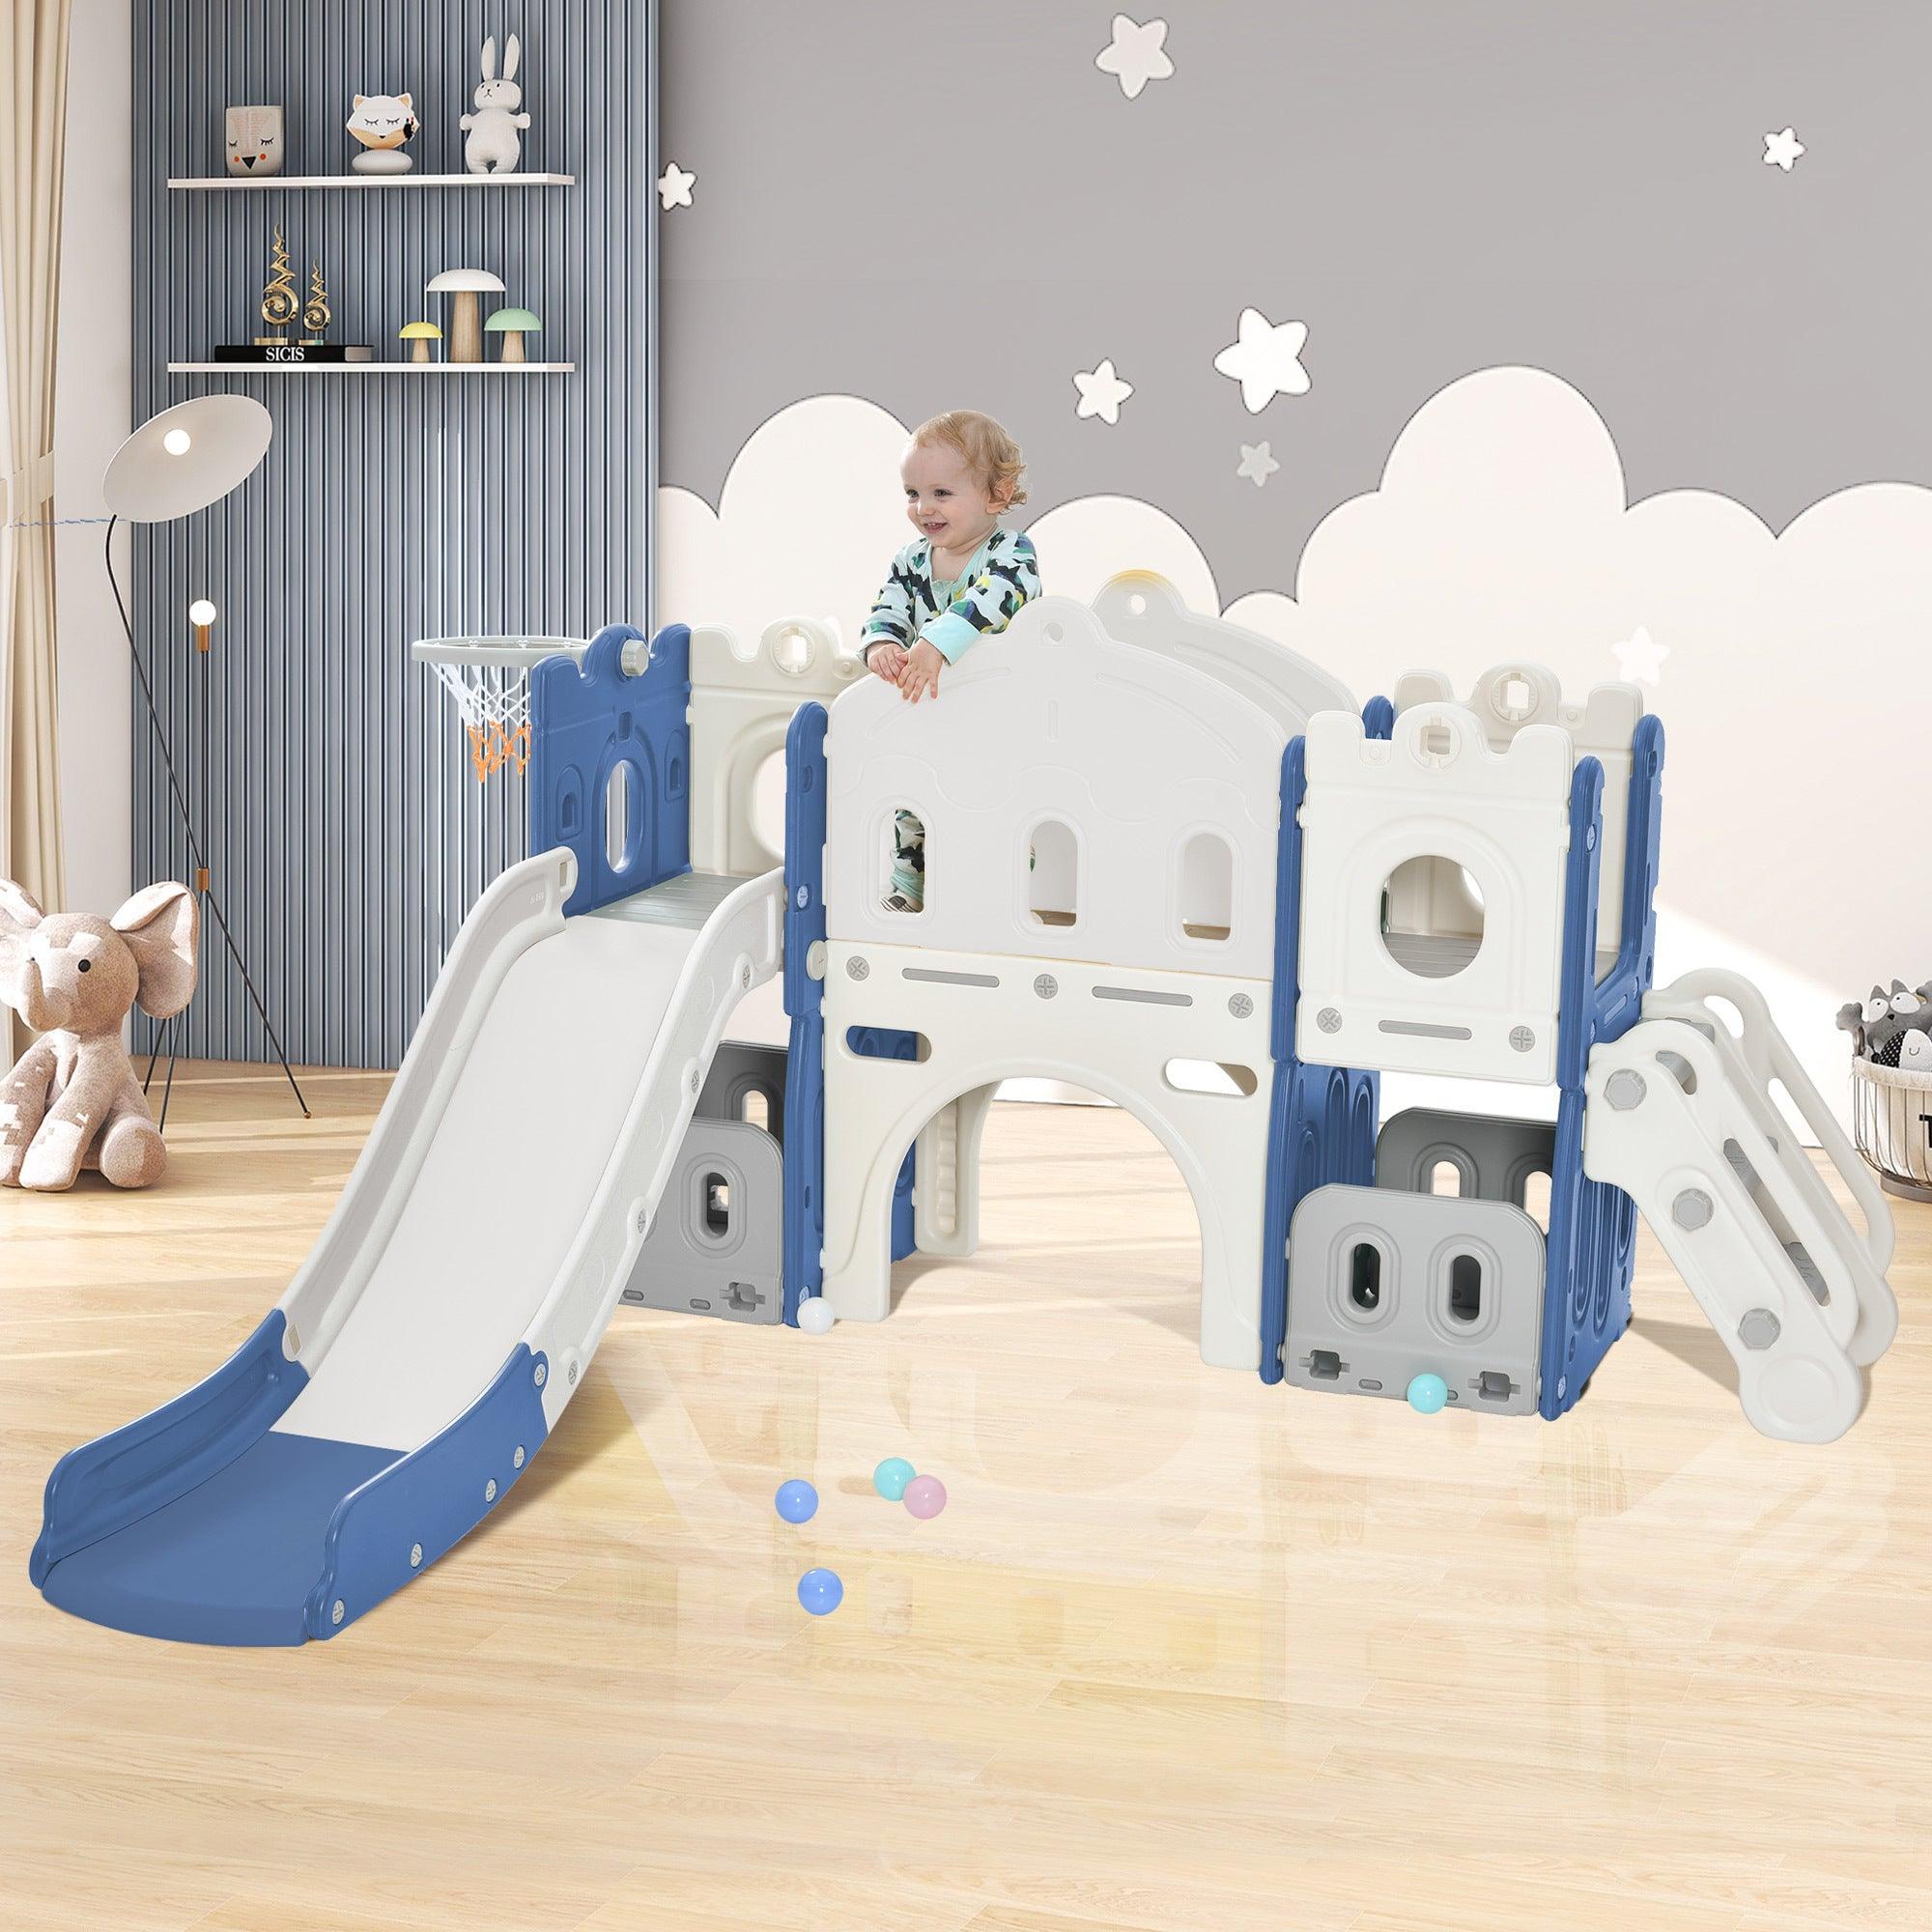 🆓🚛 Kids Slide Playset Structure, Freestanding Castle Climber With Slide & Basketball Hoop, Toy Storage Organizer for Toddlers, Kids Climbers Playhouse for Indoor Outdoor Playground Activity, Blue & White